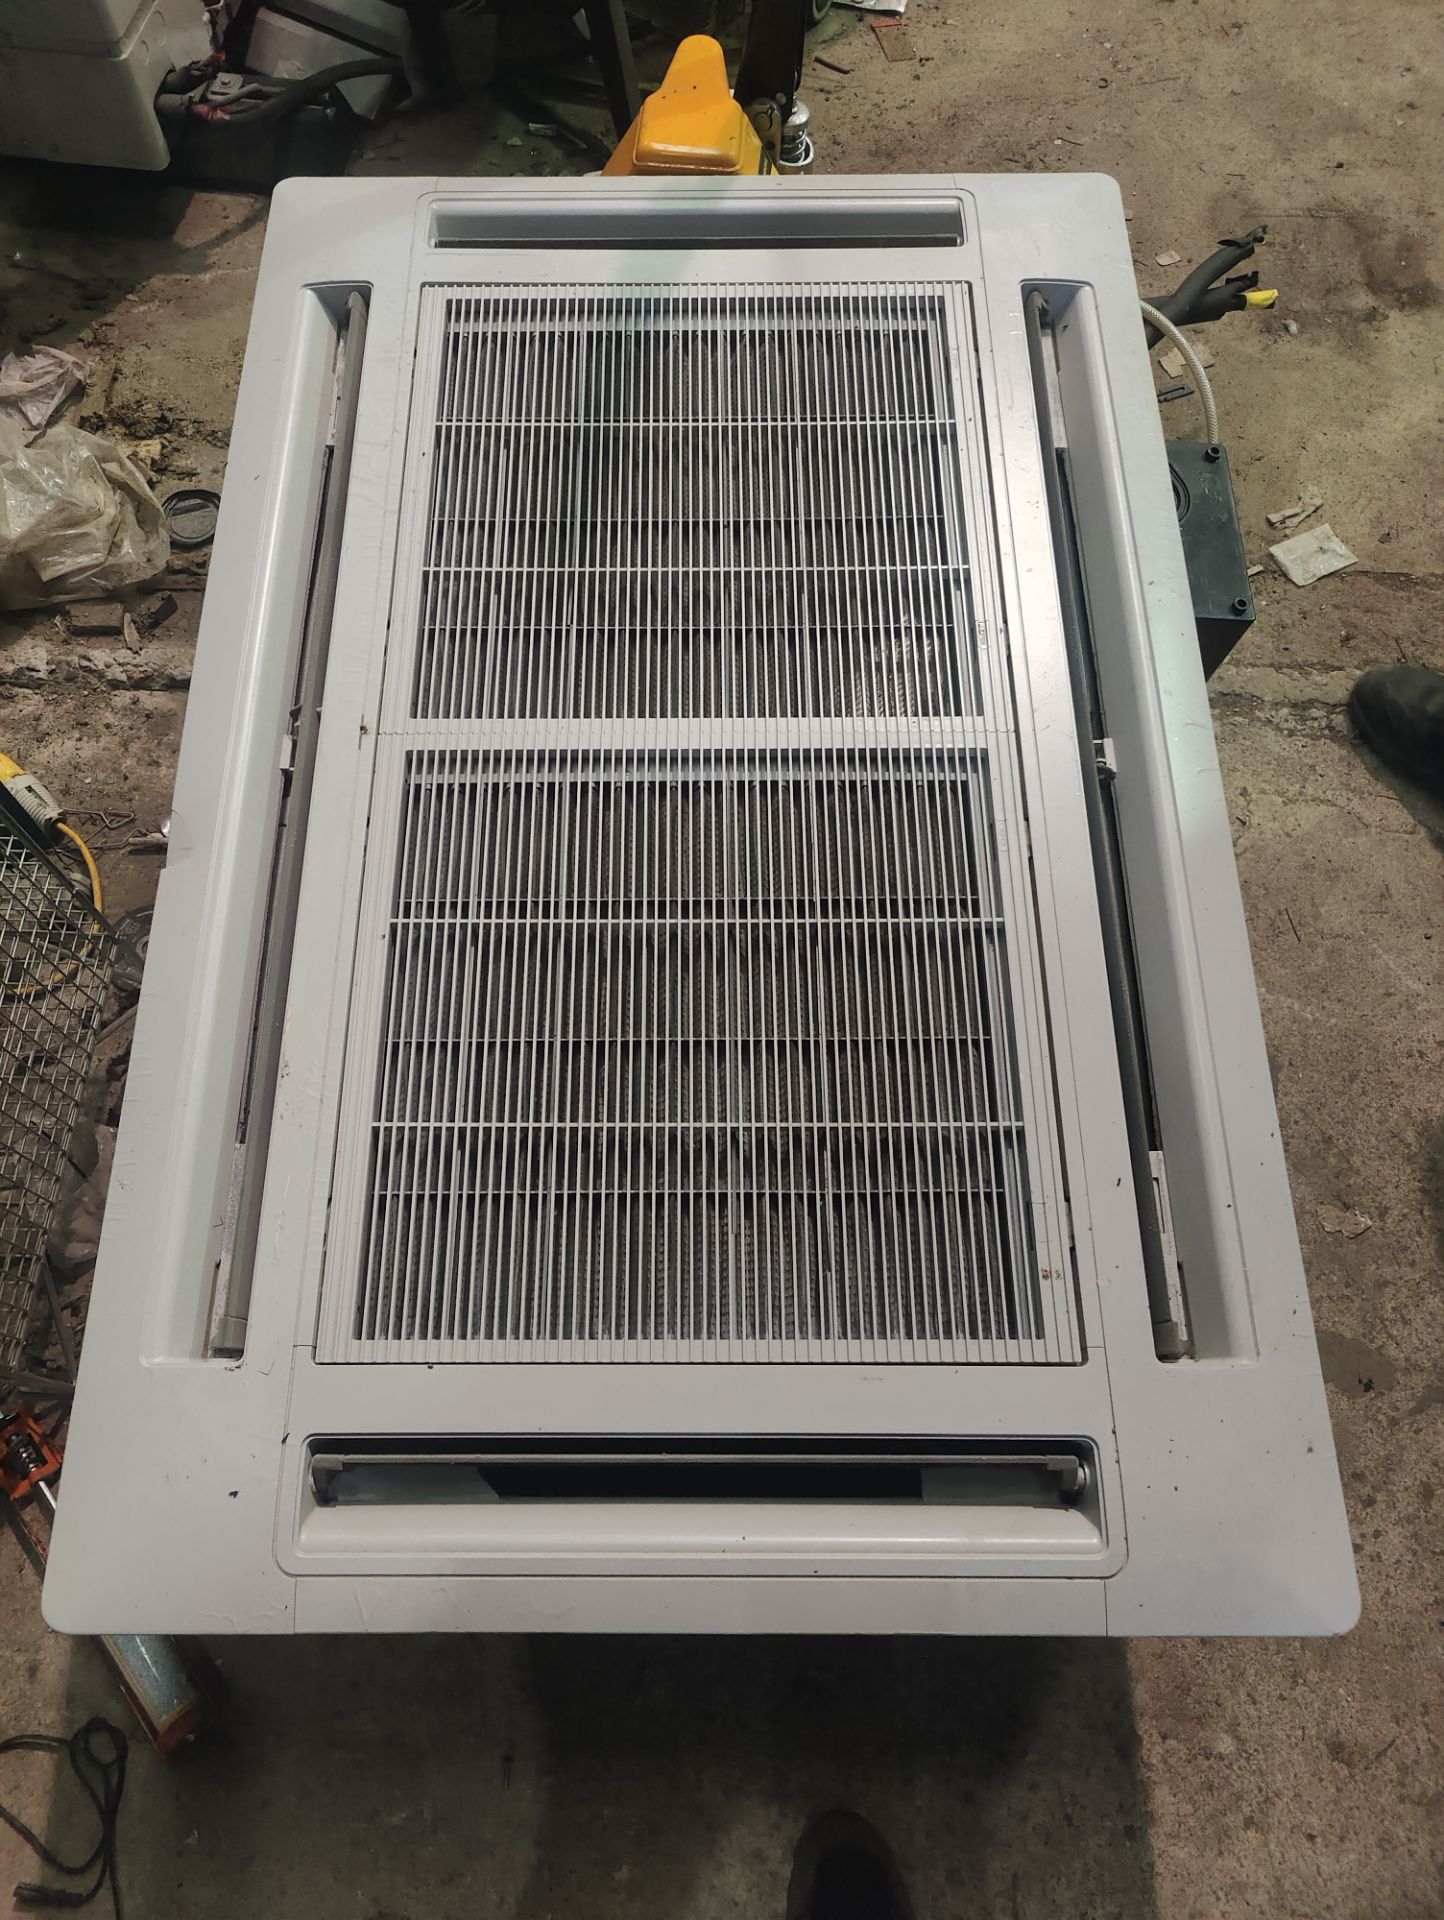 1 X AIRCON BLOWER UNIT FROM FRANKIE AND BENNY'S (EXTERNAL 150 X 90CM)